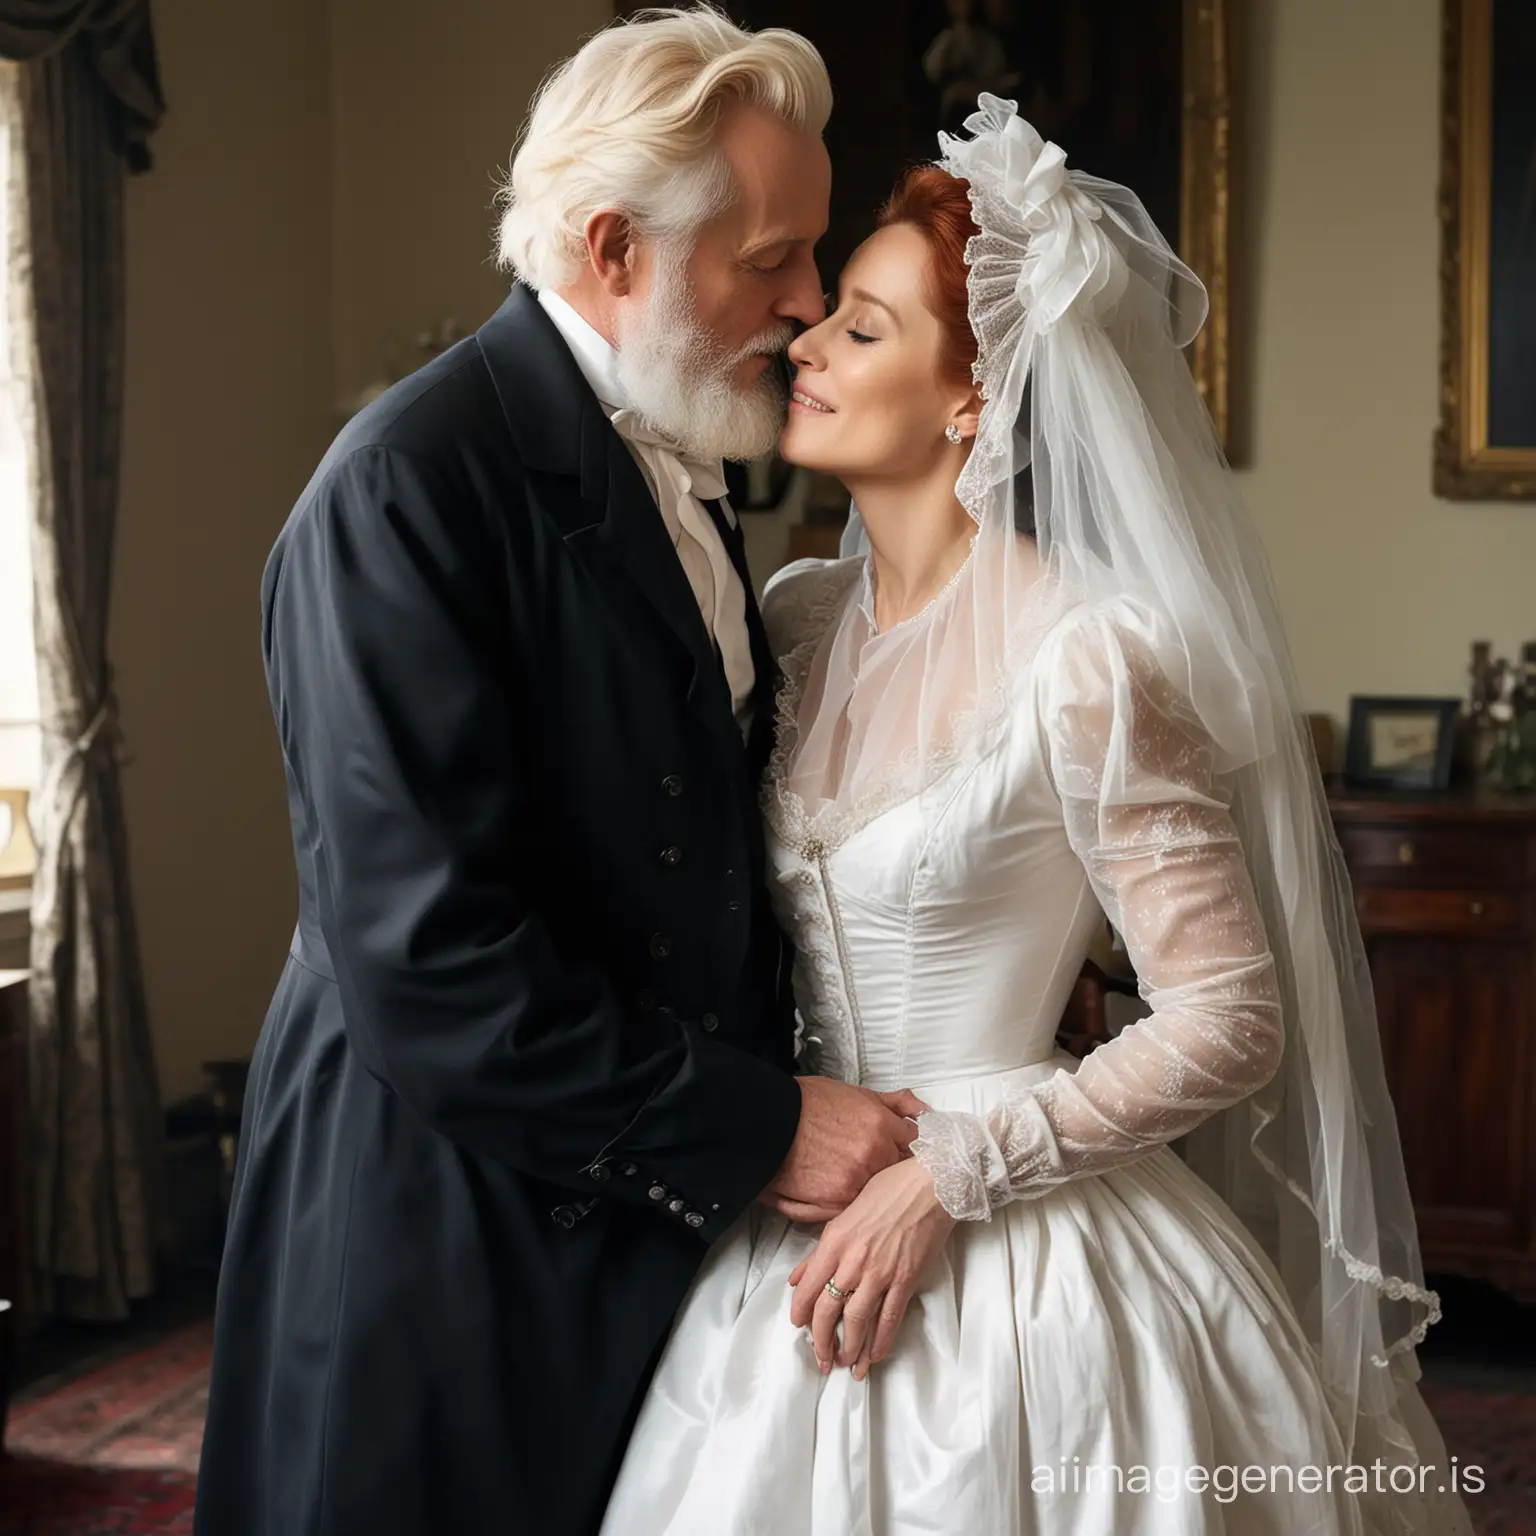 red hair Gillian Anderson wearing a poofy black floor-length loose billowing 1860 victorian crinoline dress with  a frilly bonnet kissing an old man who seems to be her newlywed husband